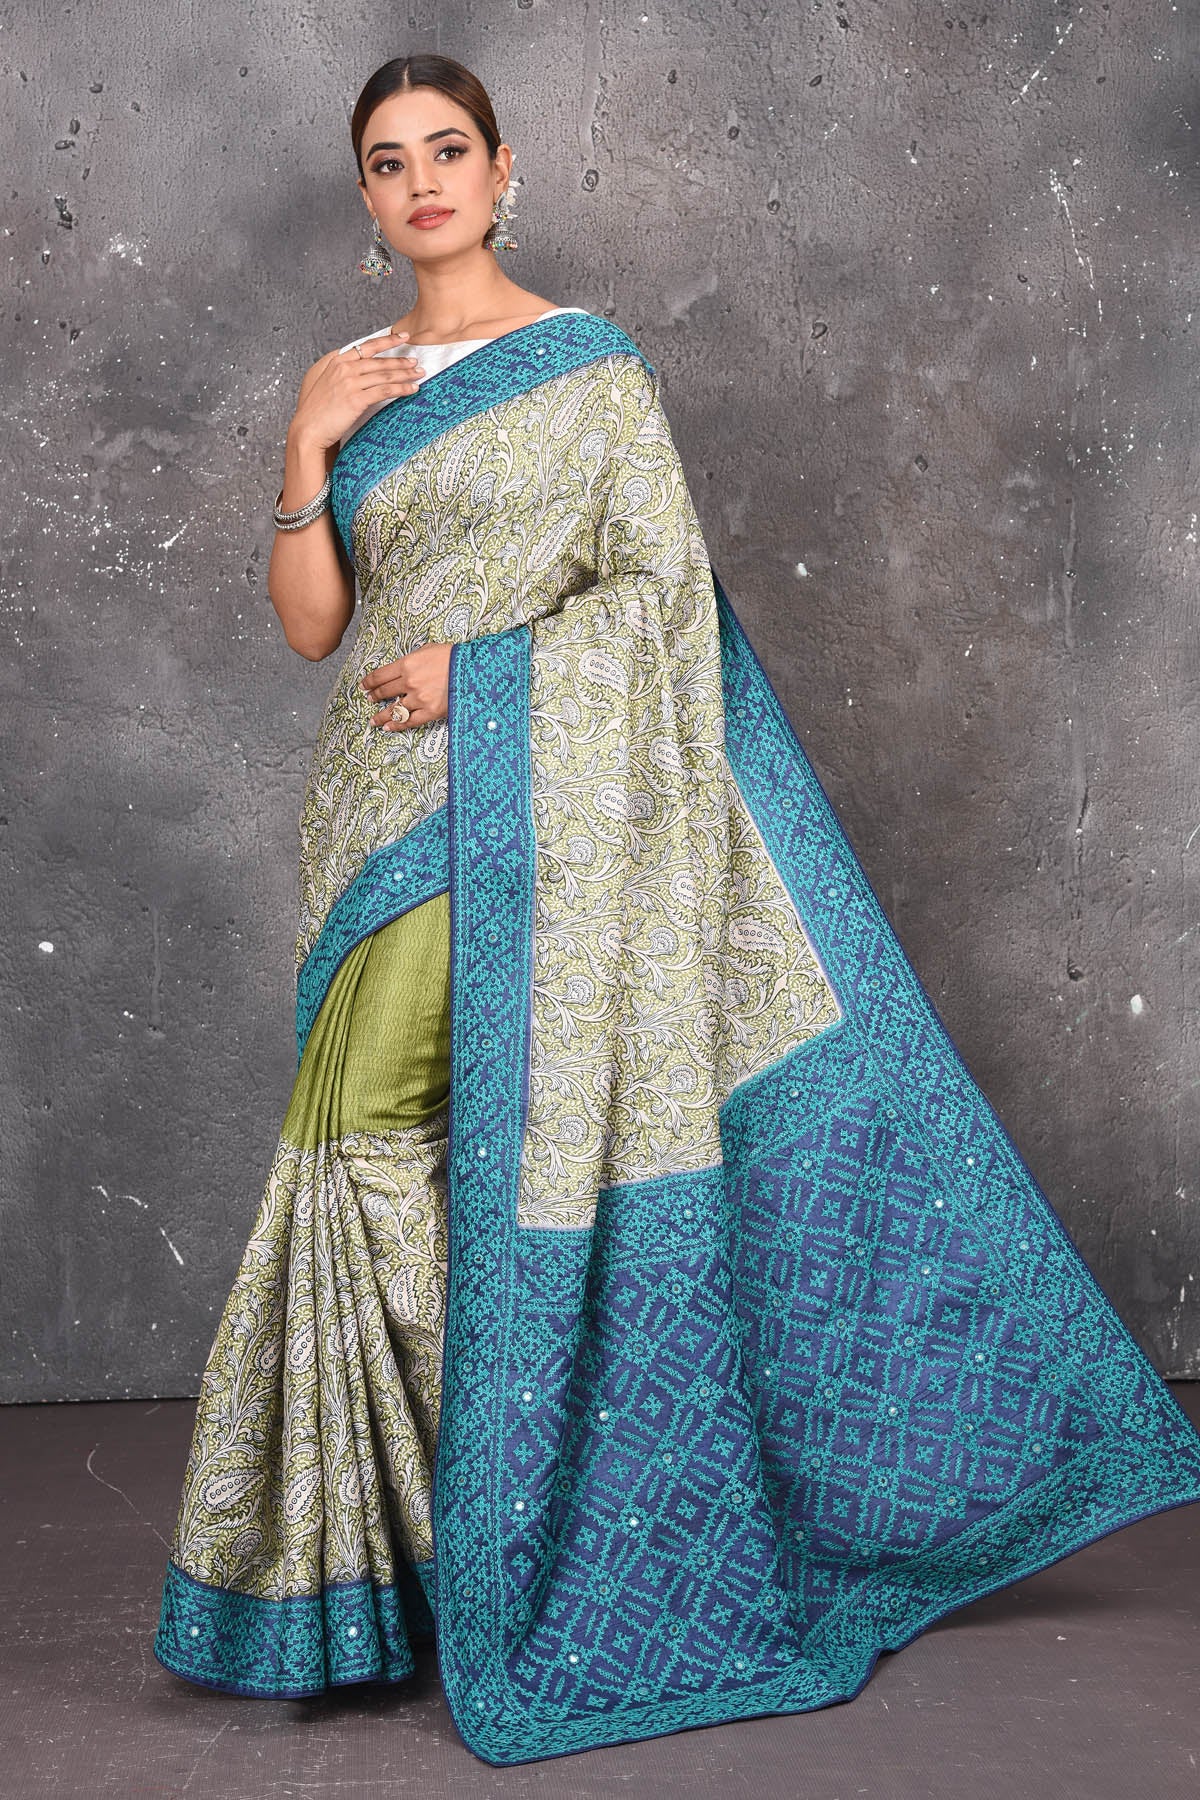 Buy this exquisite hand block printed designer saree in silver-grey and blue color with kutch work online in USA.  Add this hand-embroidered tussar sari which has made up of pure tussar silk. These sarees can be worn for any occasion - It carries a class. Buy this tussar sari with any blouse from Pure Elegance Indian saree store in USA.- Full view with open pallu.